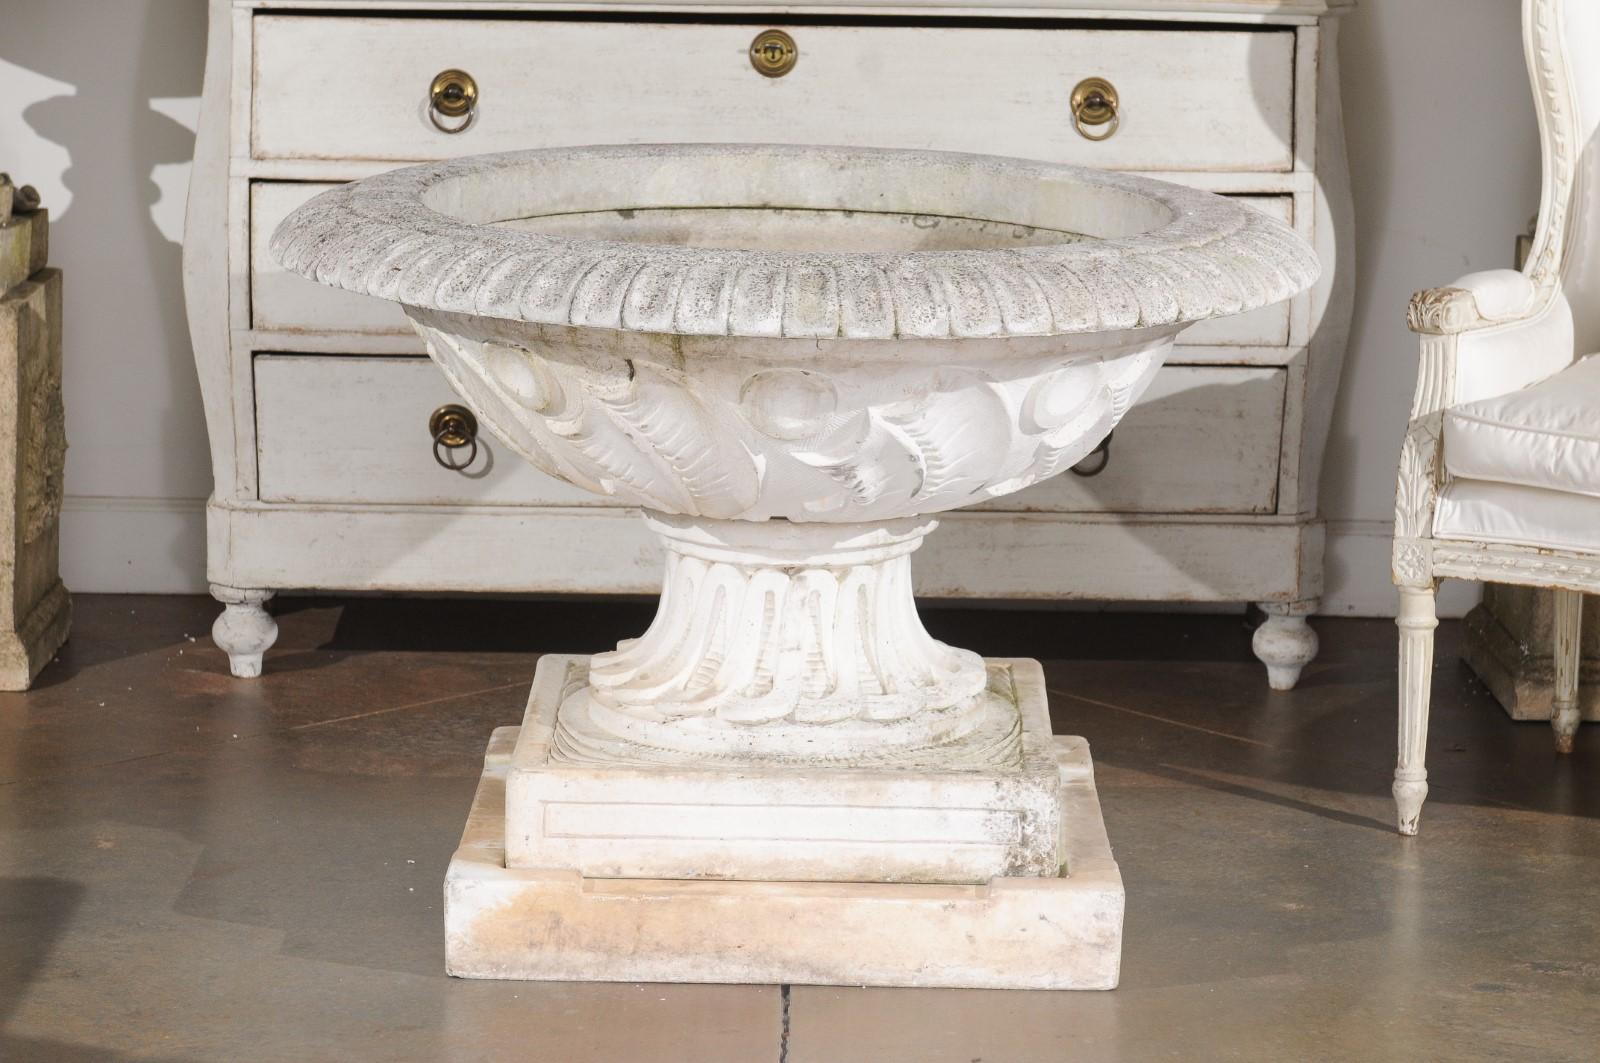 An English cast stone fountain from the 20th century, with scoop and foliage motifs. Created in England during the 20th century, this vintage cast stone fountain features a circular bowl adorned with a perfect rhythm of scoop motifs on the rim. The